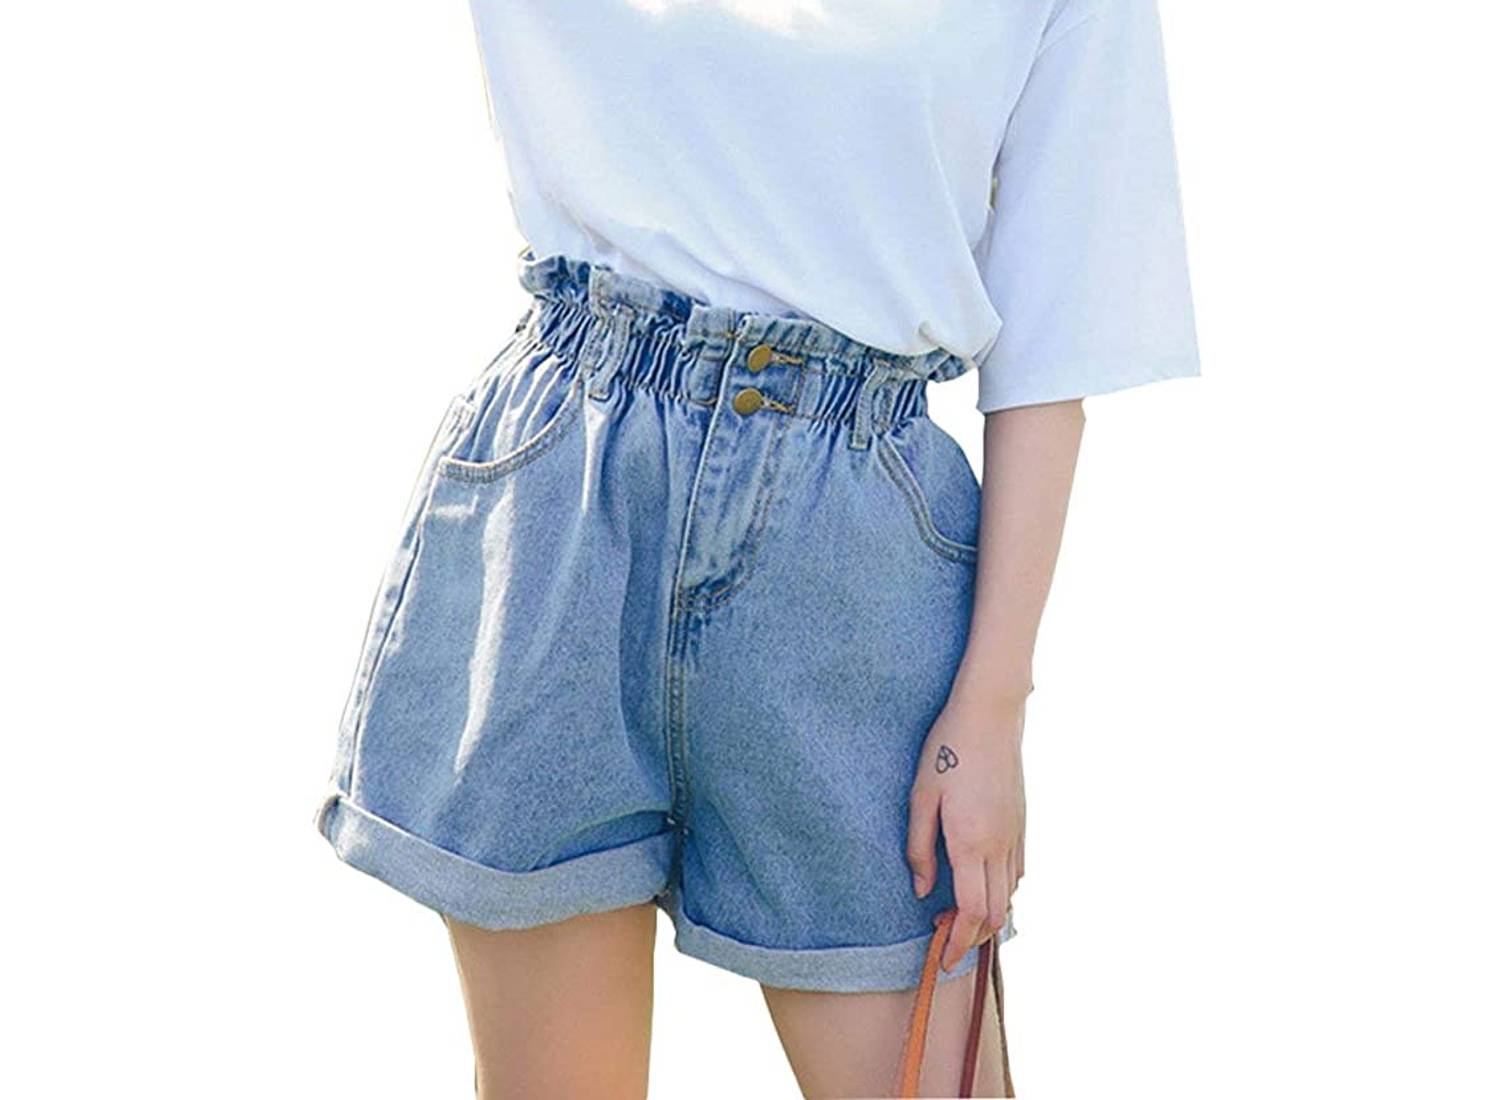 A woman wearing a T-shirt and a pair of stretch high-waisted denim shorts